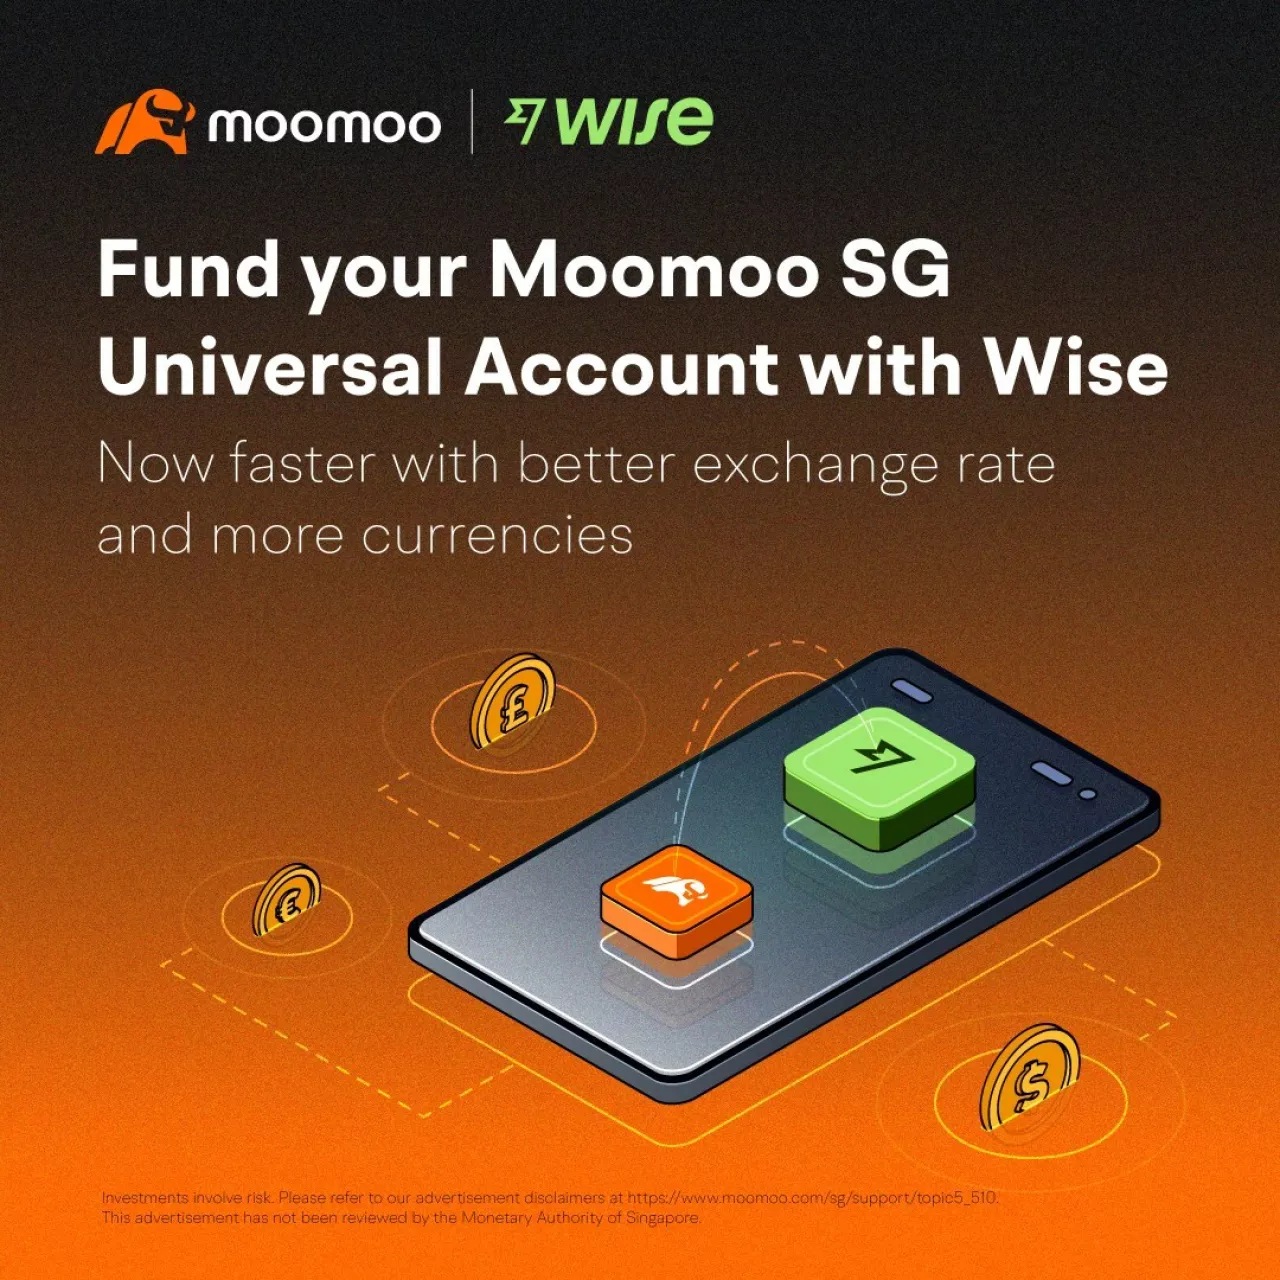 Moomoo Singapore users can now choose to deposit through Wise, which enables them to convert their local currency to Singapore Dollars at the real mid-market exchange rate, free from hidden fees and mark-ups. img#1